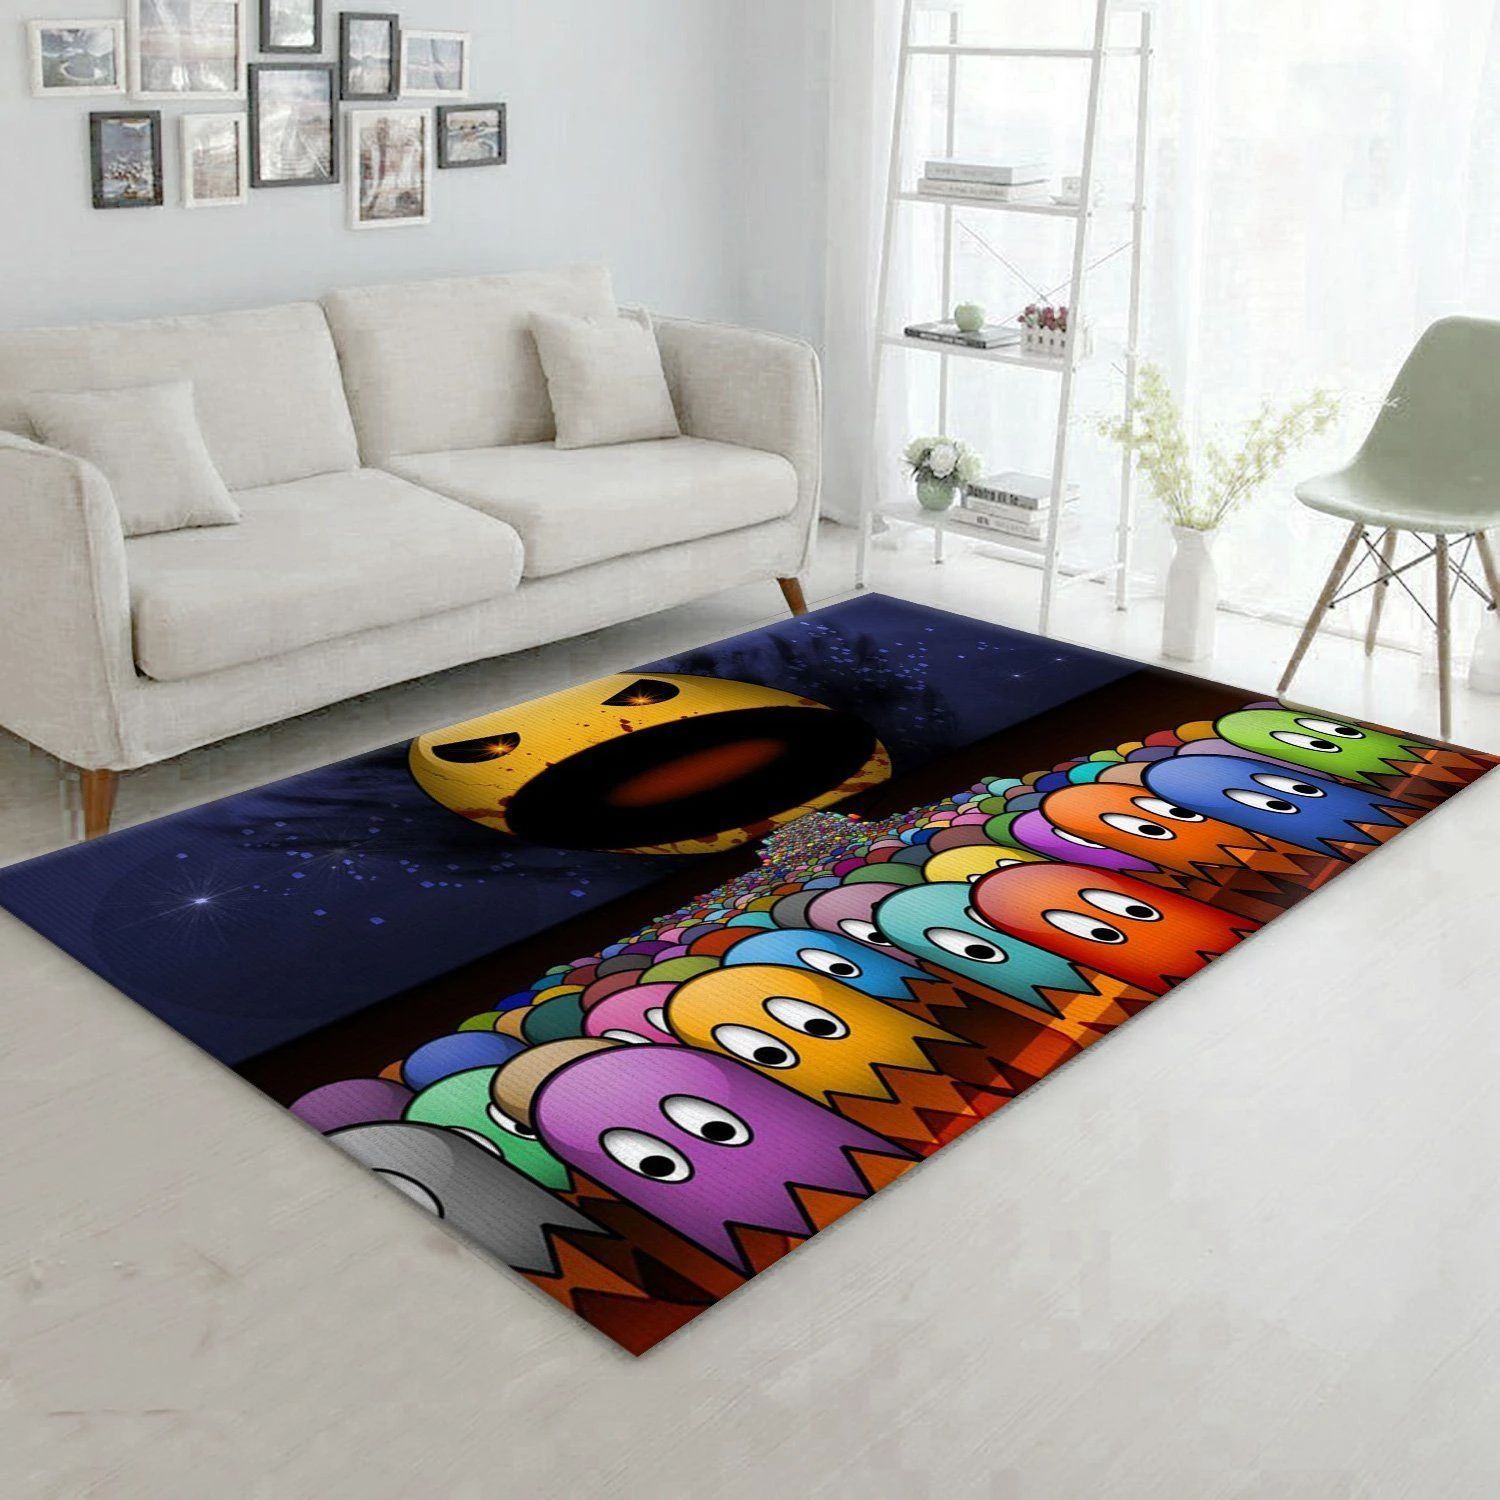 Pacman Eat Pacman Area Rug Living Room Rug Christmas Gift US Decor - Indoor Outdoor Rugs